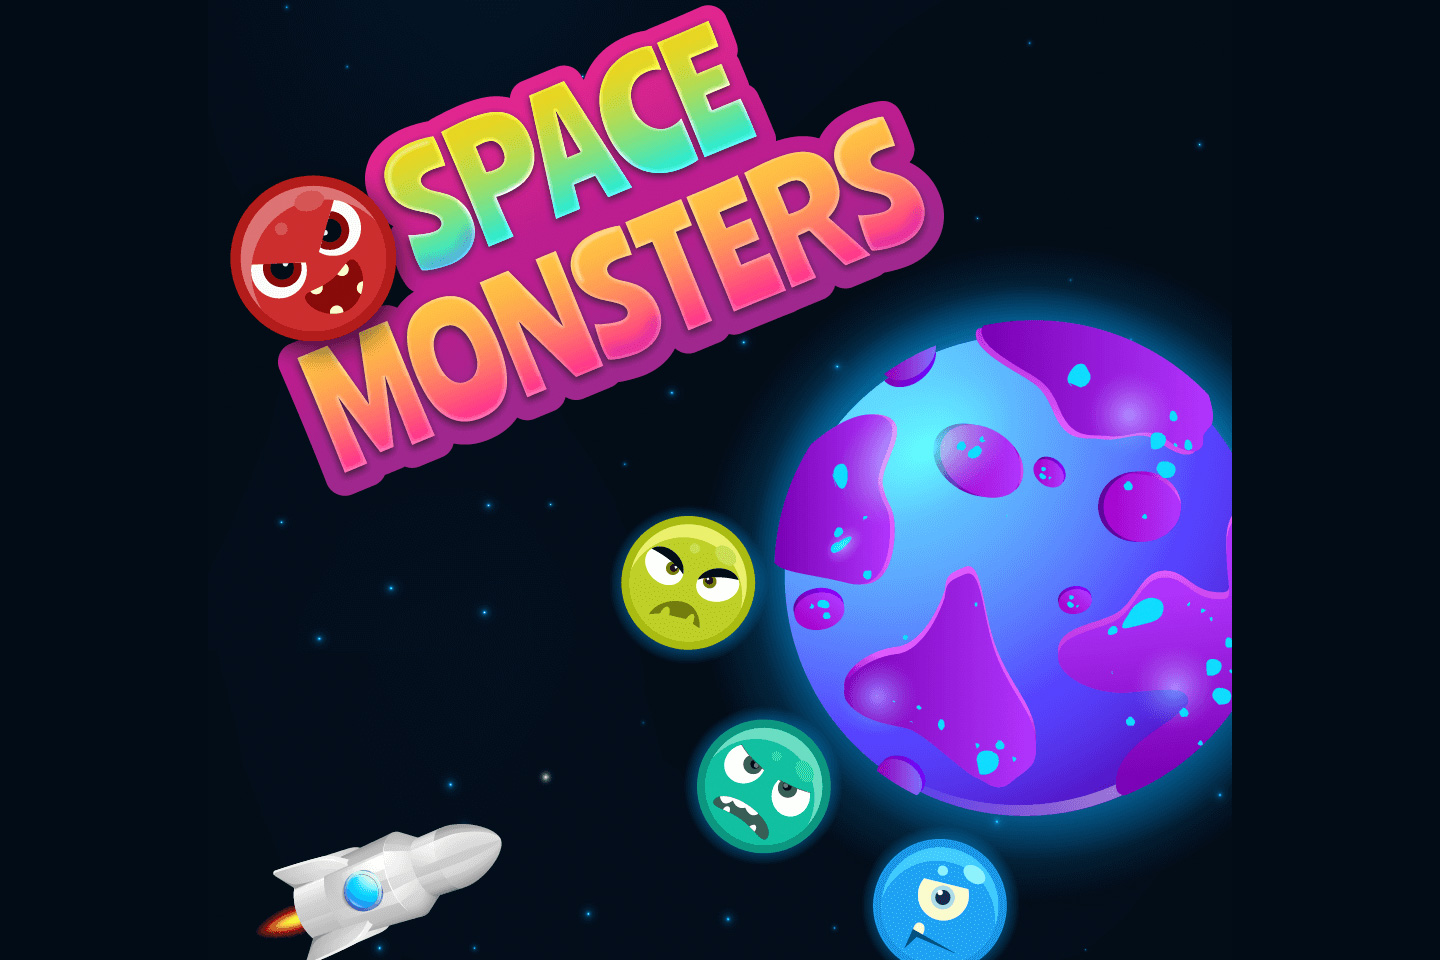 Space Monsters